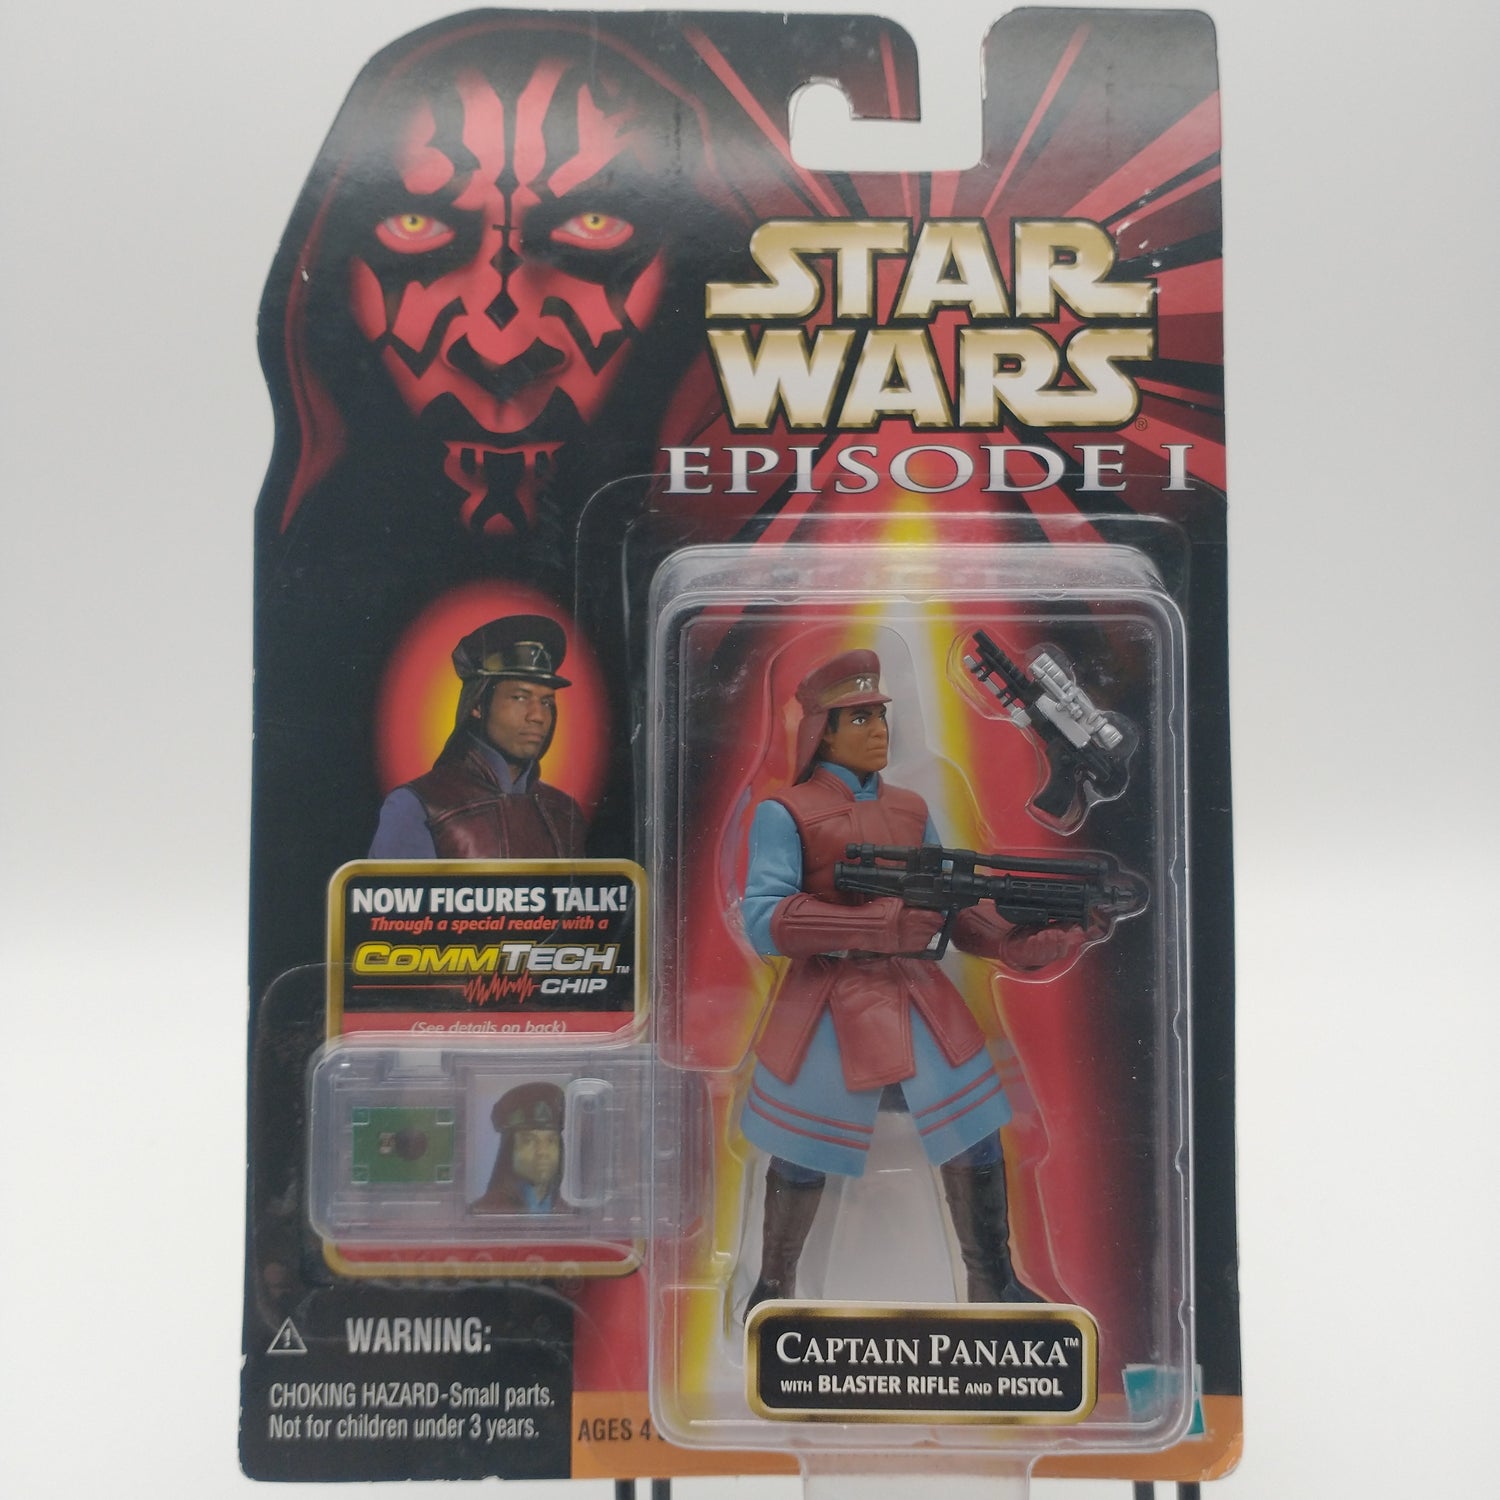 The front of the card and bubble. The action figure is sealed inside the bubble, and he has two guns, he's wearing a reddish brown hat